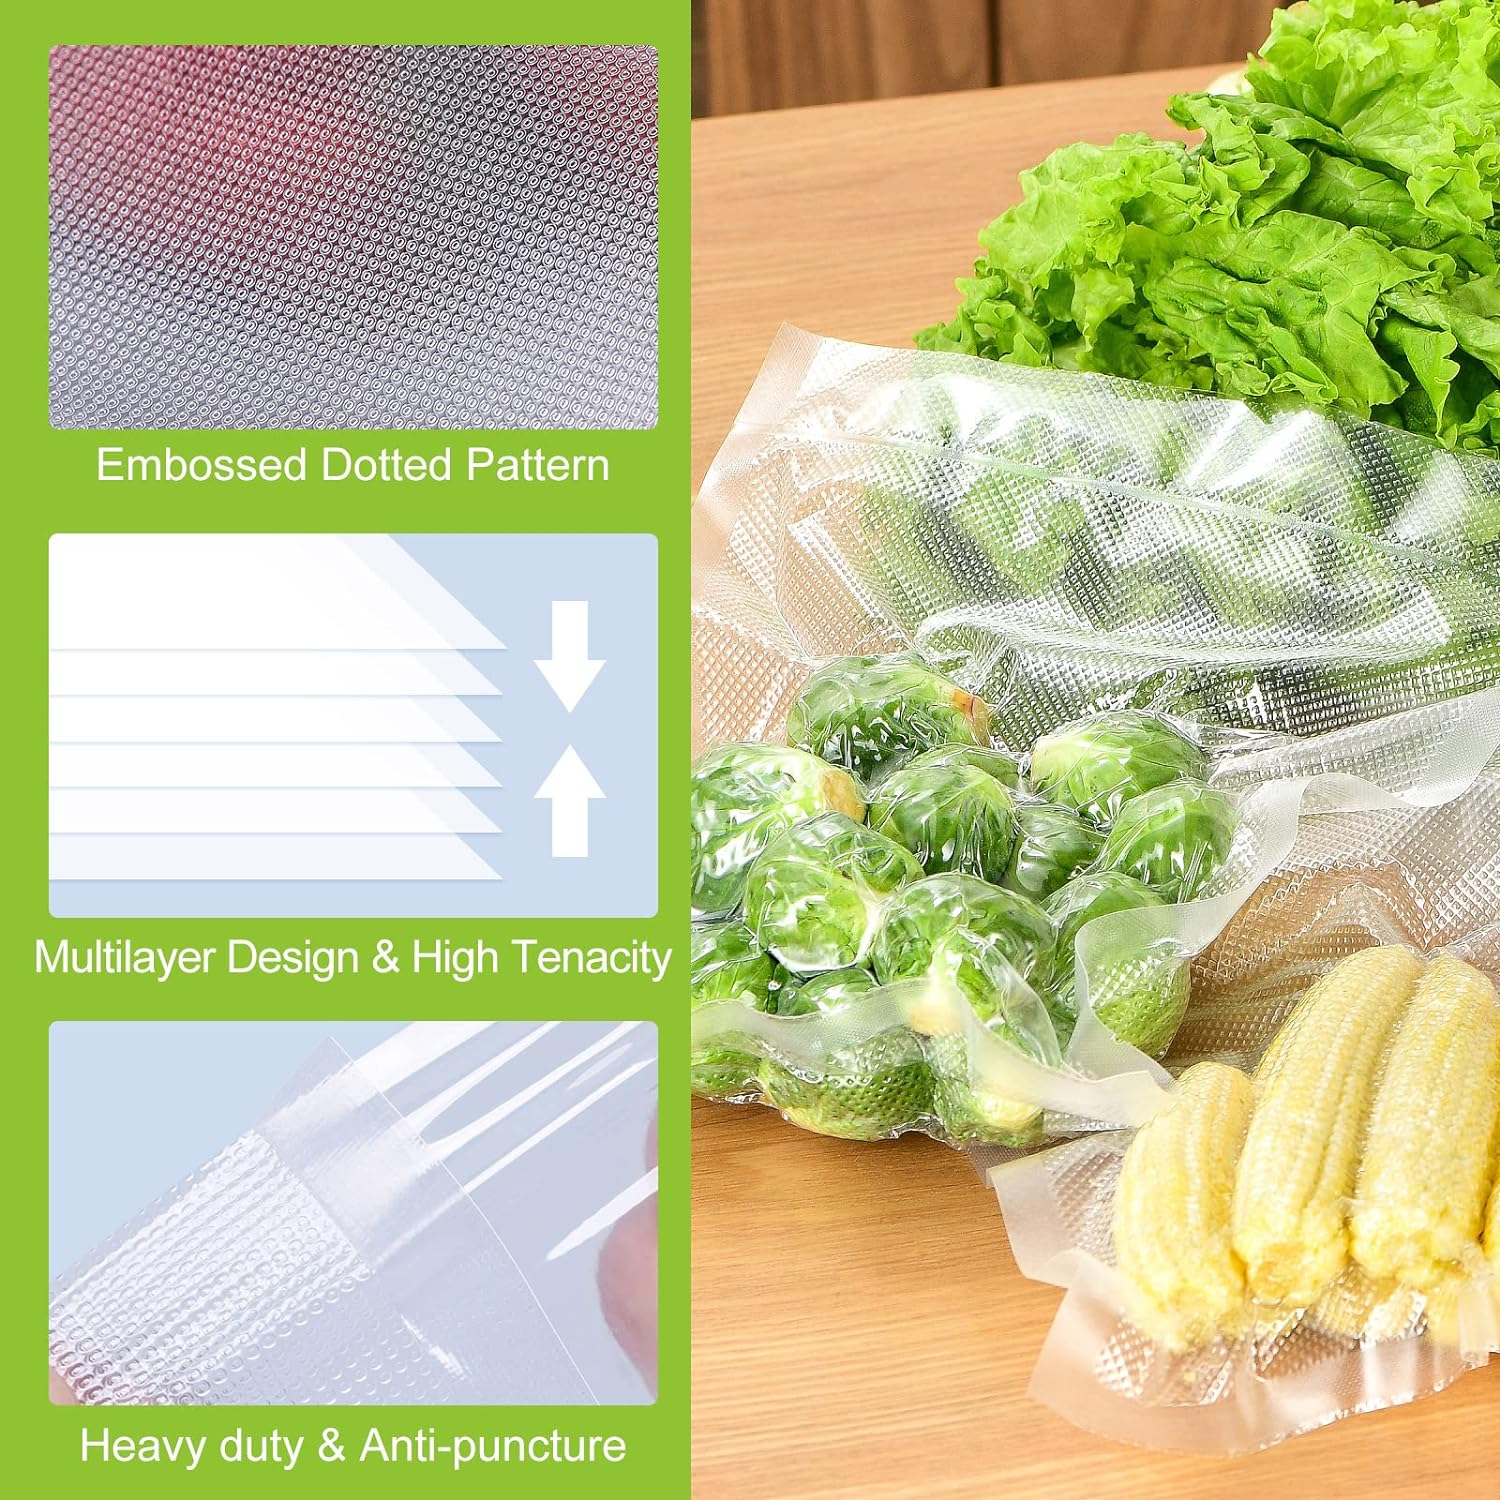 Great Choice Products Vacuum Sealer Rolls Bags, 6 Pack 11" X 20' 3 Rolls +8" X 20' 3 Rolls Storage Bags, Bpa Free, Durable Commercial Customized